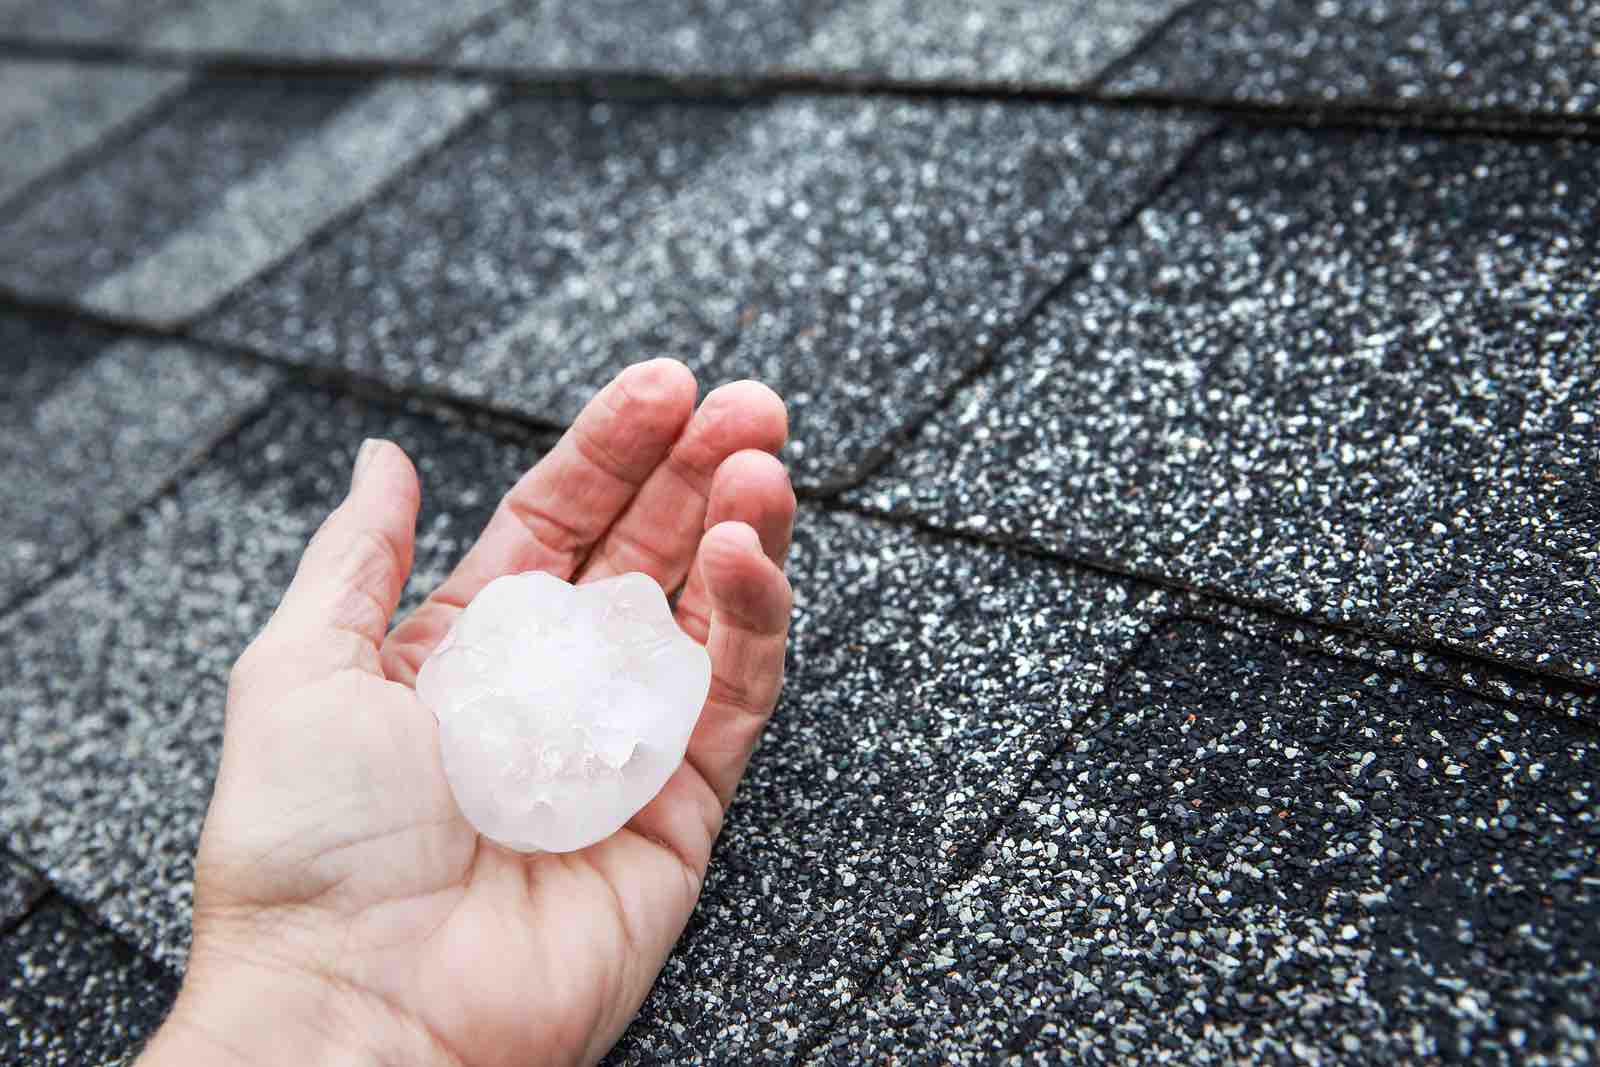 Homeowner holds hail stone that caused Houston roof damage